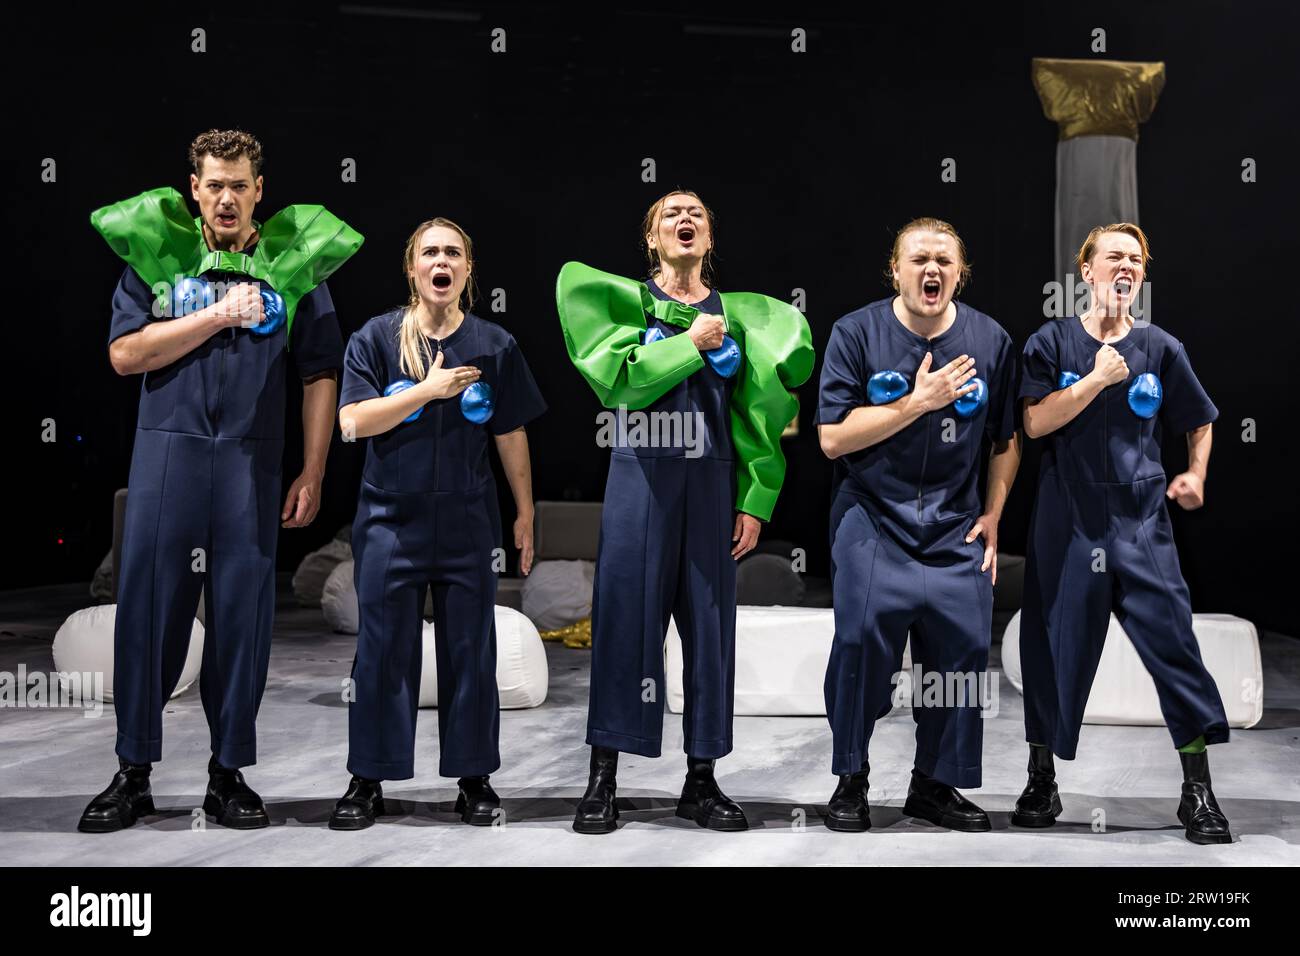 Cottbus, Germany. 13th Sep, 2023. Actors Markus Paul (l-r), Juli Niemann, Sigrun Fischer, Johannes Scheidweiler and Sophie Bock stand on stage as the band of robbers during a photo rehearsal for the play 'Die Räuber'. The production based on the first German drama by Friedrich Schiller, in a version by director Pia Richter, will be the first premiere of the Staatstheater Cottbus in the 23.24 season on Sept. 16, 2023. Credit: Frank Hammerschmidt/dpa/Alamy Live News Stock Photo